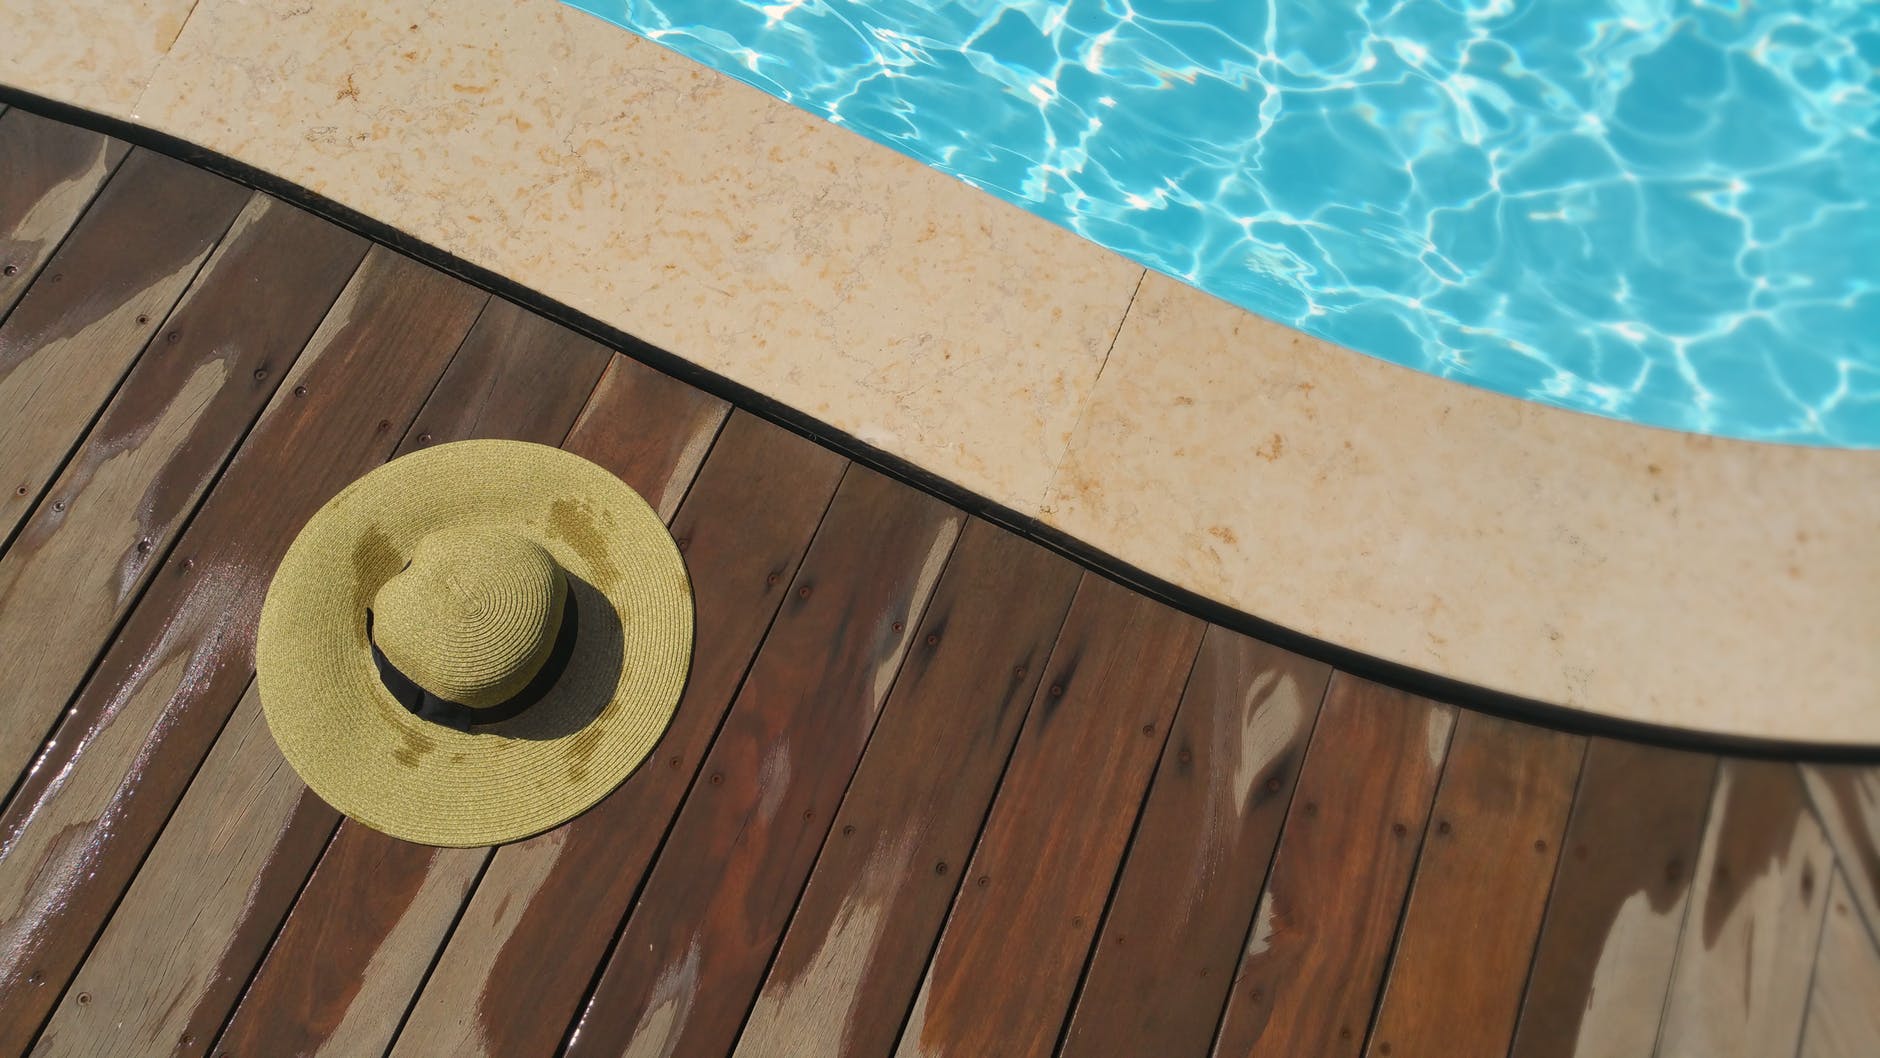 Straw hat by cruise poolside